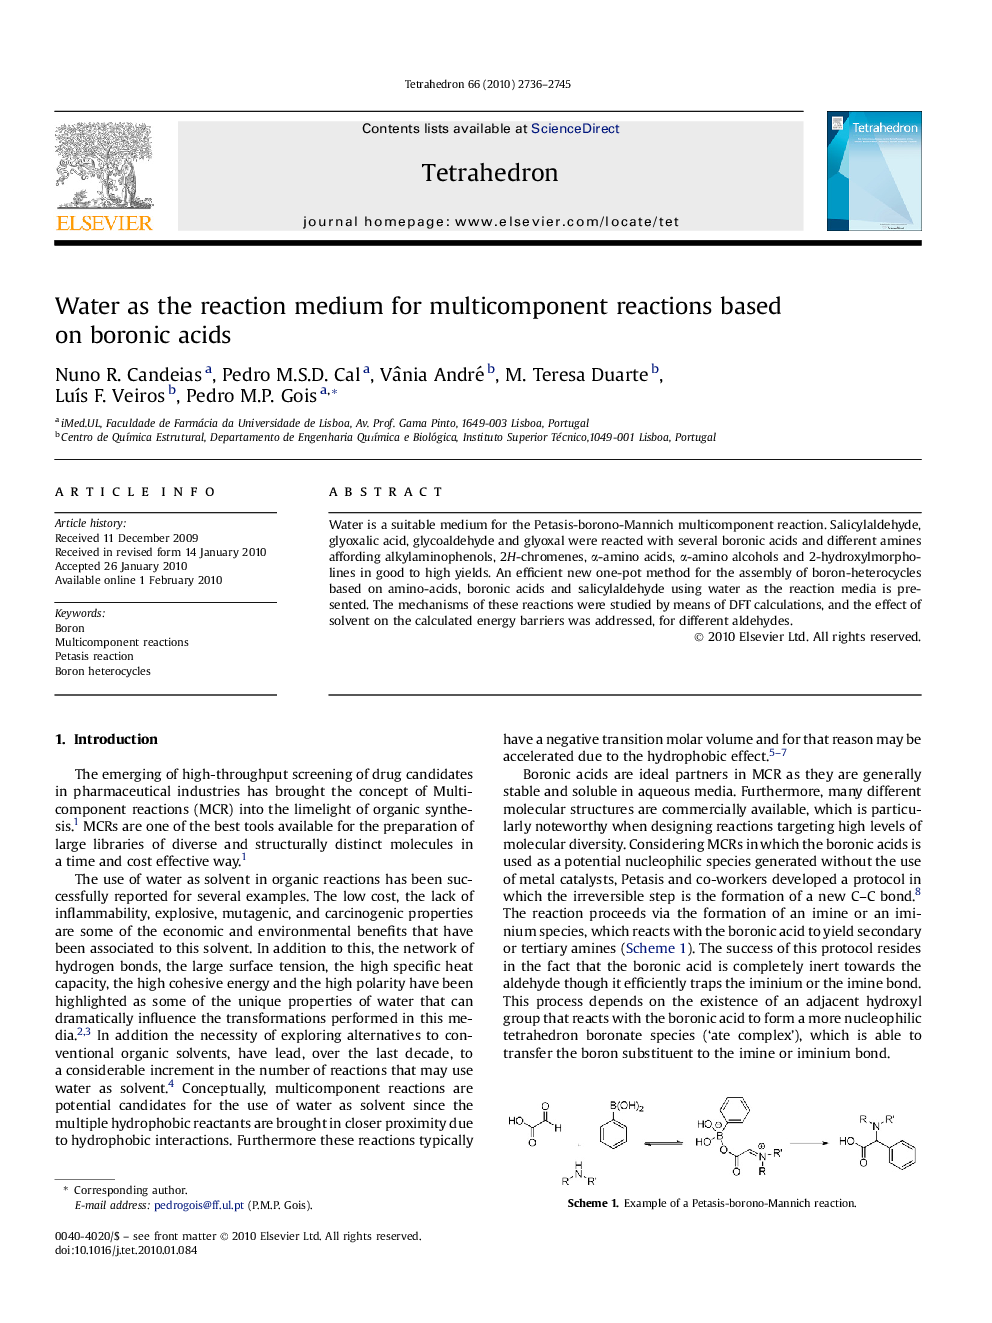 Water as the reaction medium for multicomponent reactions based on boronic acids